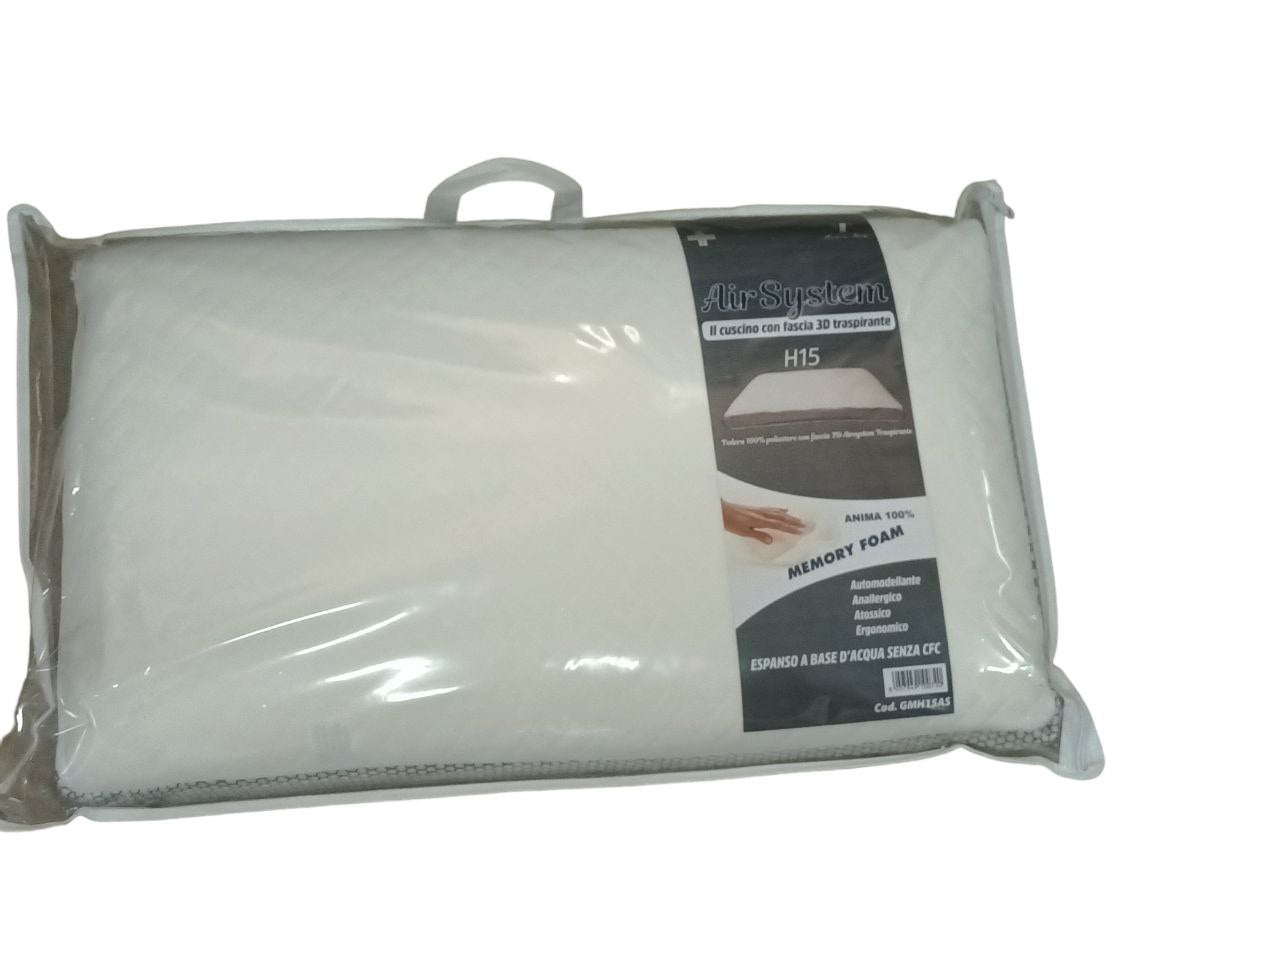 H15 3D breathable airsystem pillow 